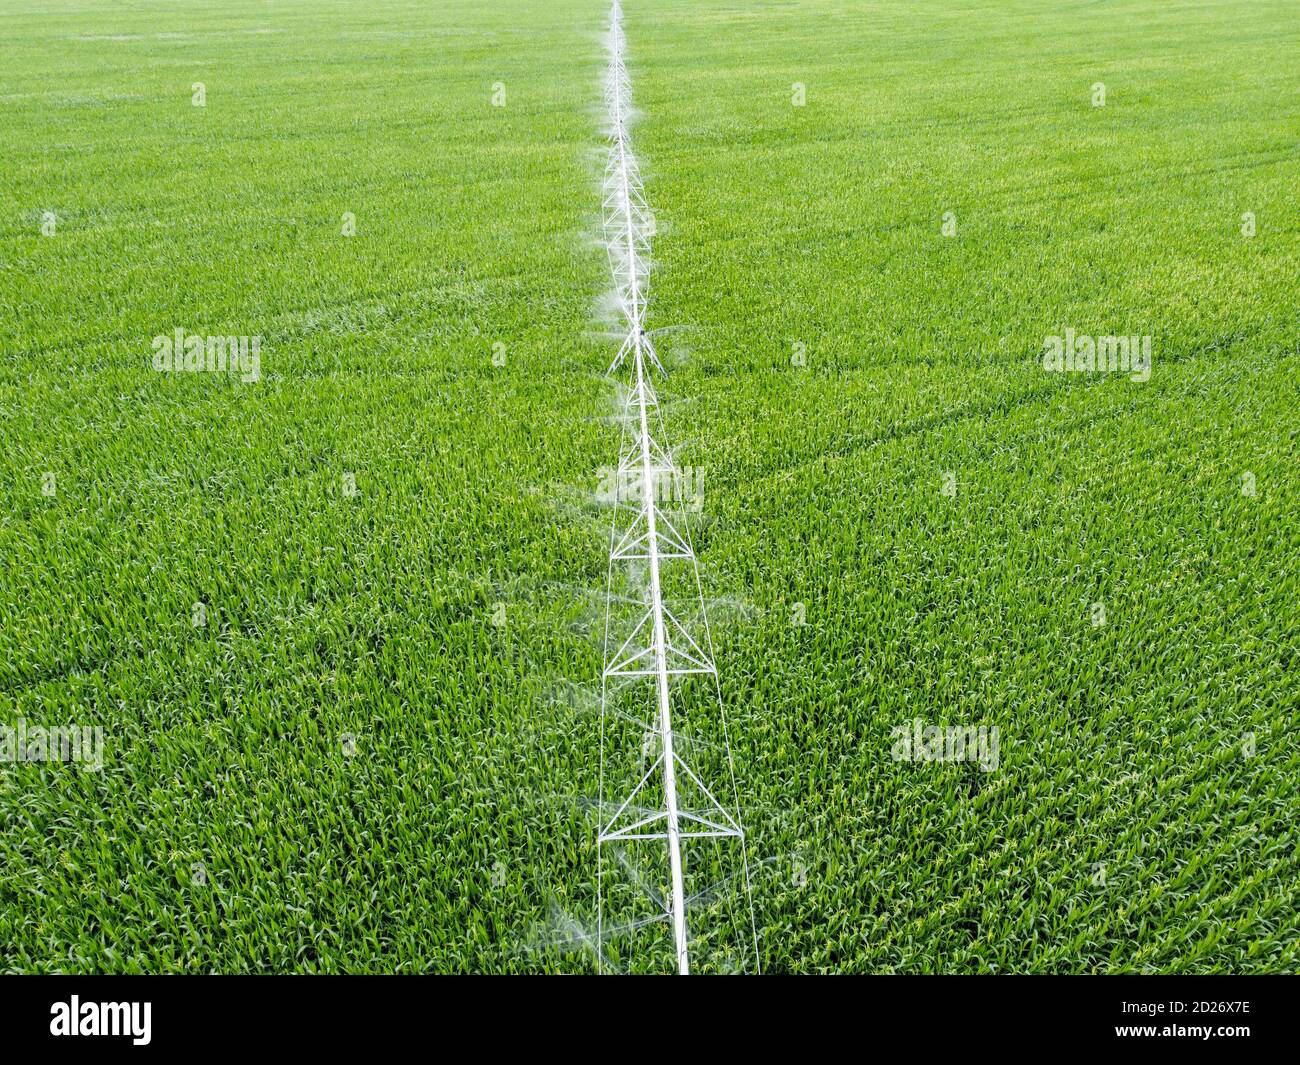 Irrigation system over corn field, top view Stock Photo